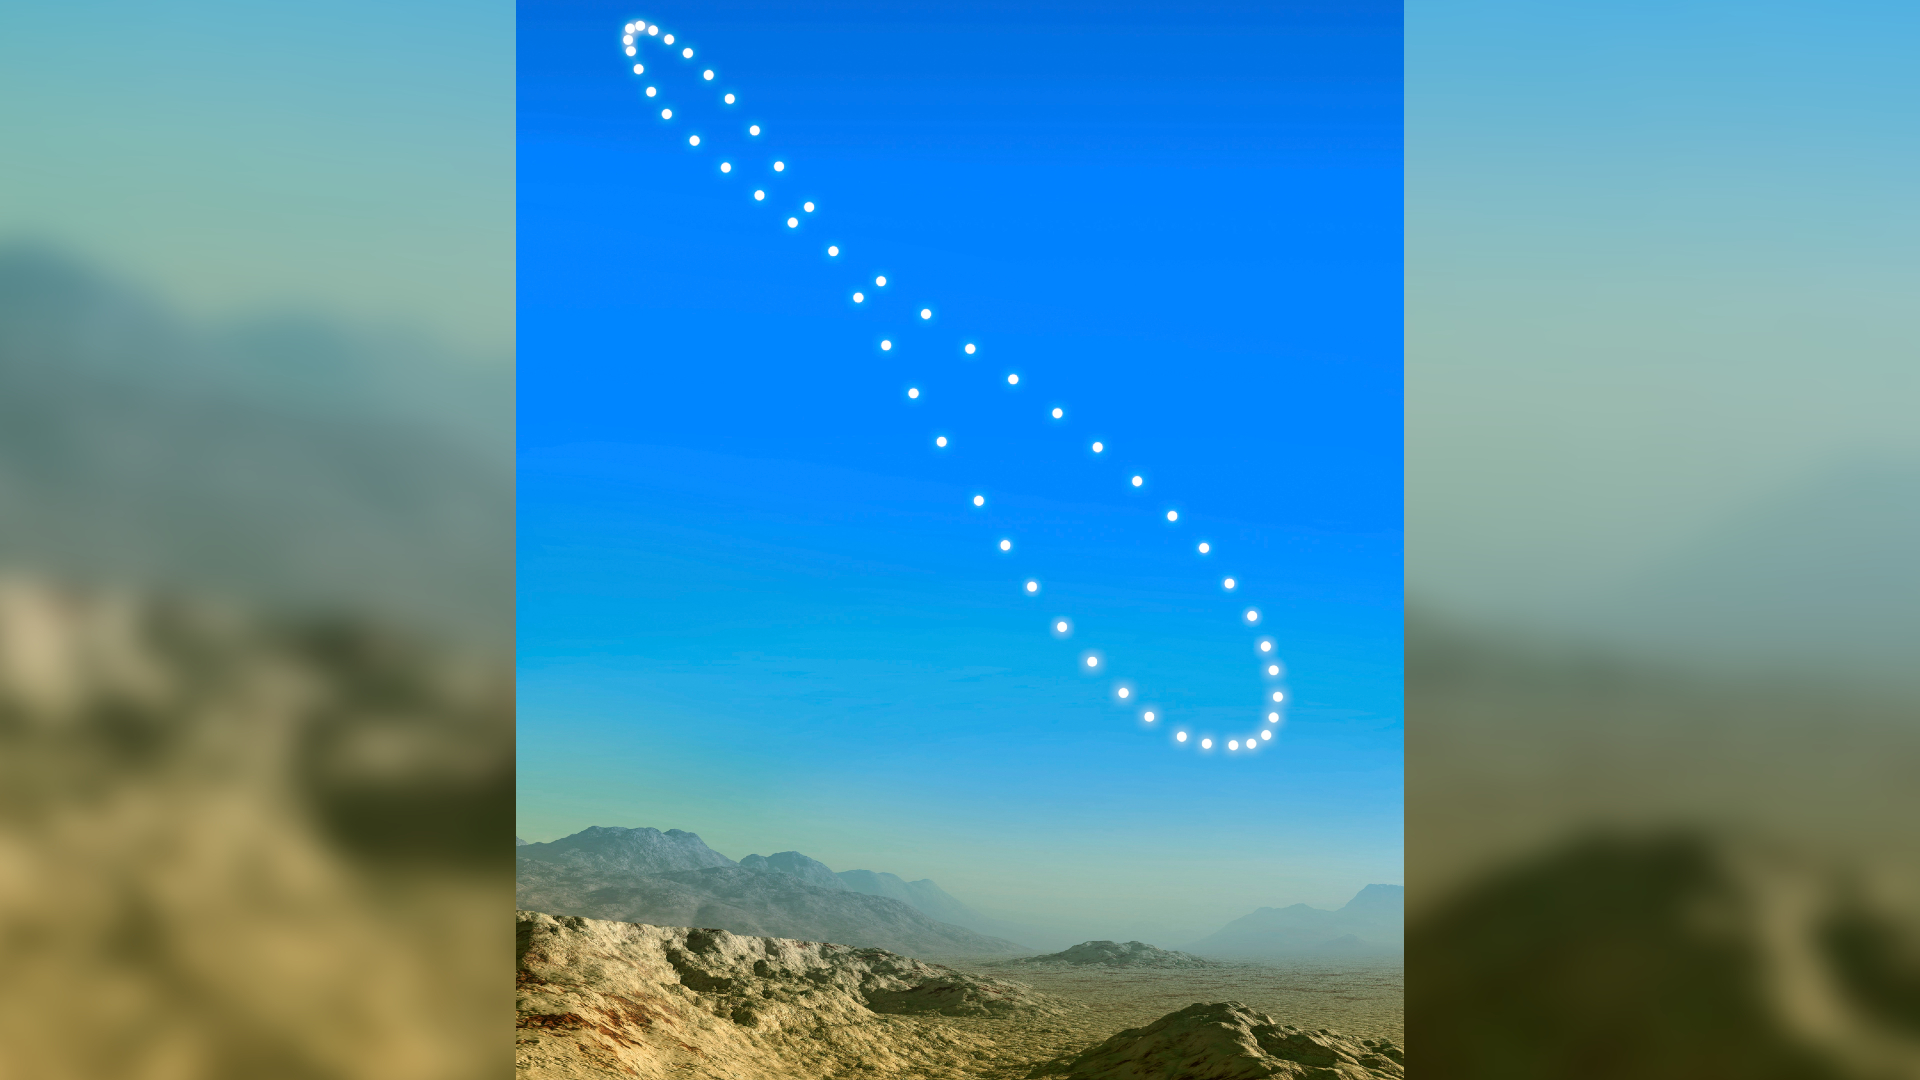 Artist's illustration of an analemma in the sky.  Each point of light demonstrates a "snapshot" image of the sun's position in the sky.  When displayed together all the points of light look like a lopsided figure of eight stretching across the blue sky.